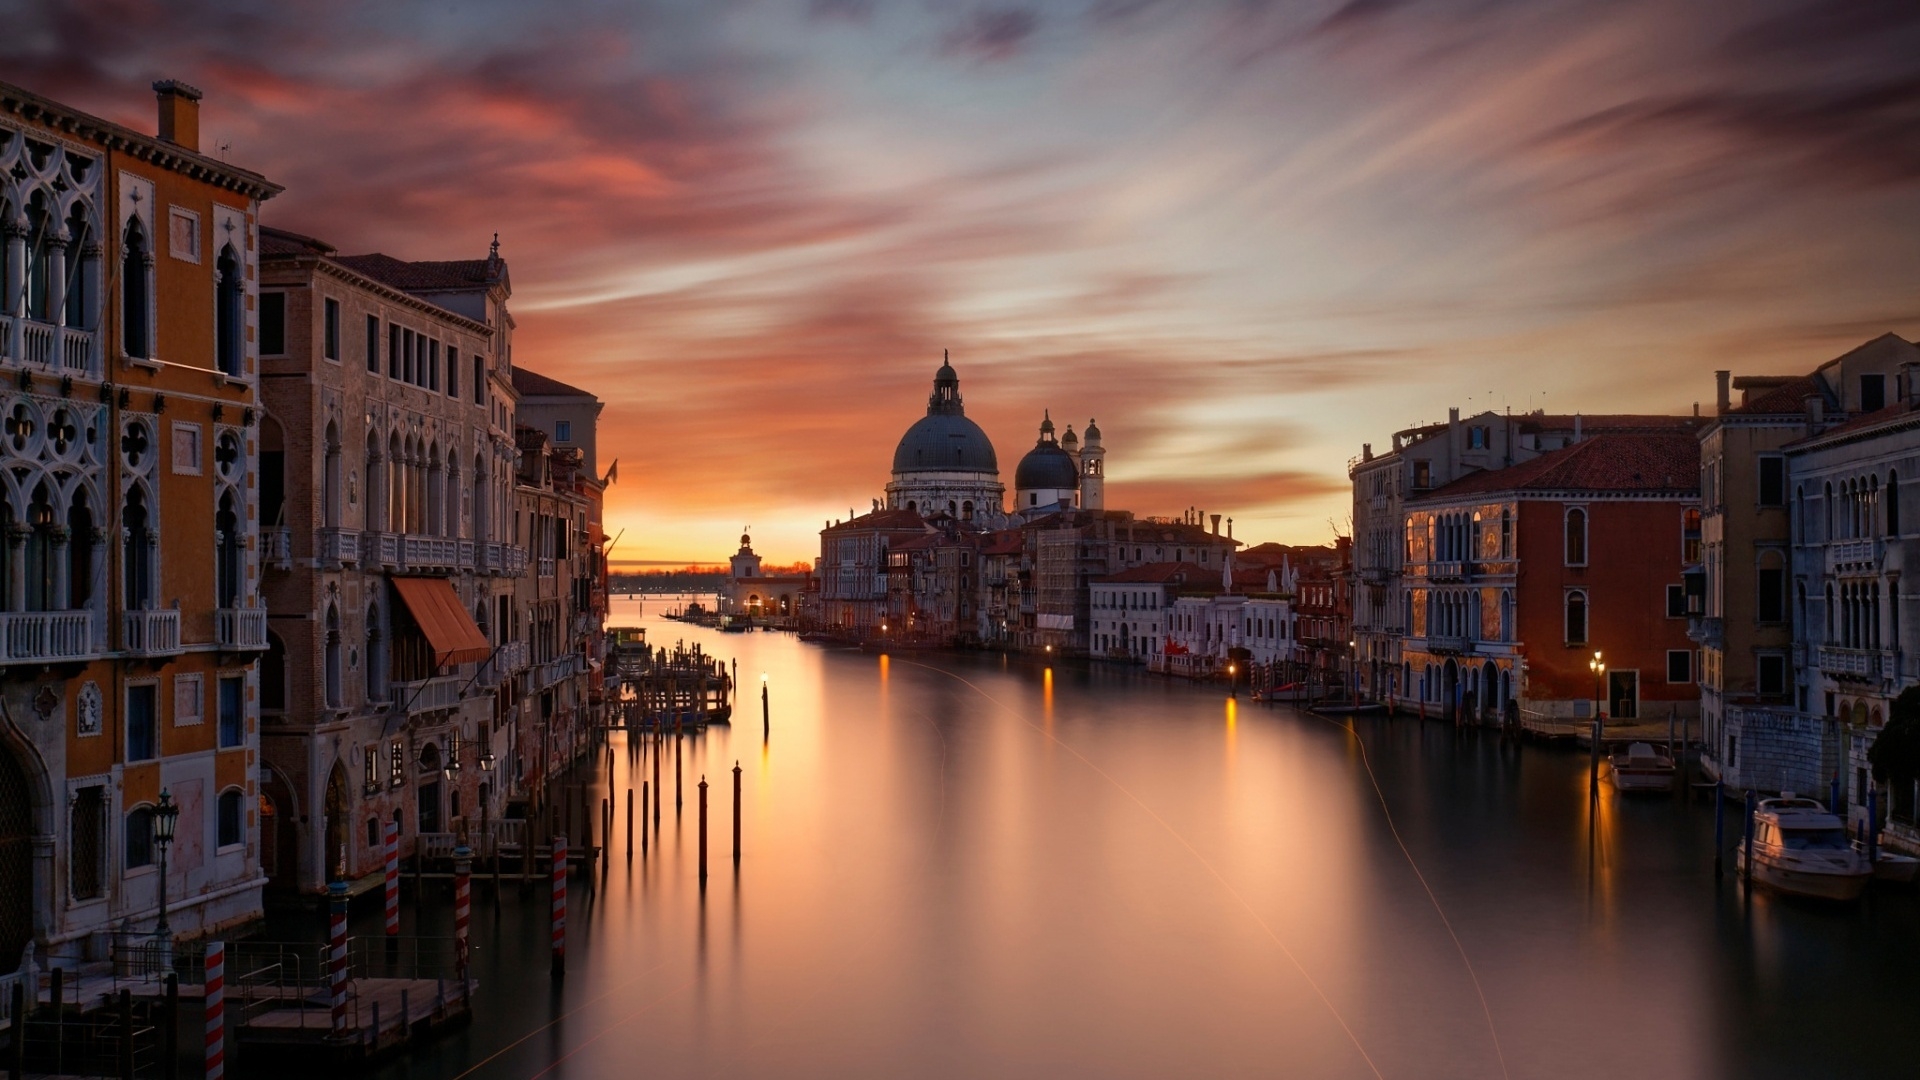 The Grand Canal Venice for 1920 x 1080 HDTV 1080p resolution